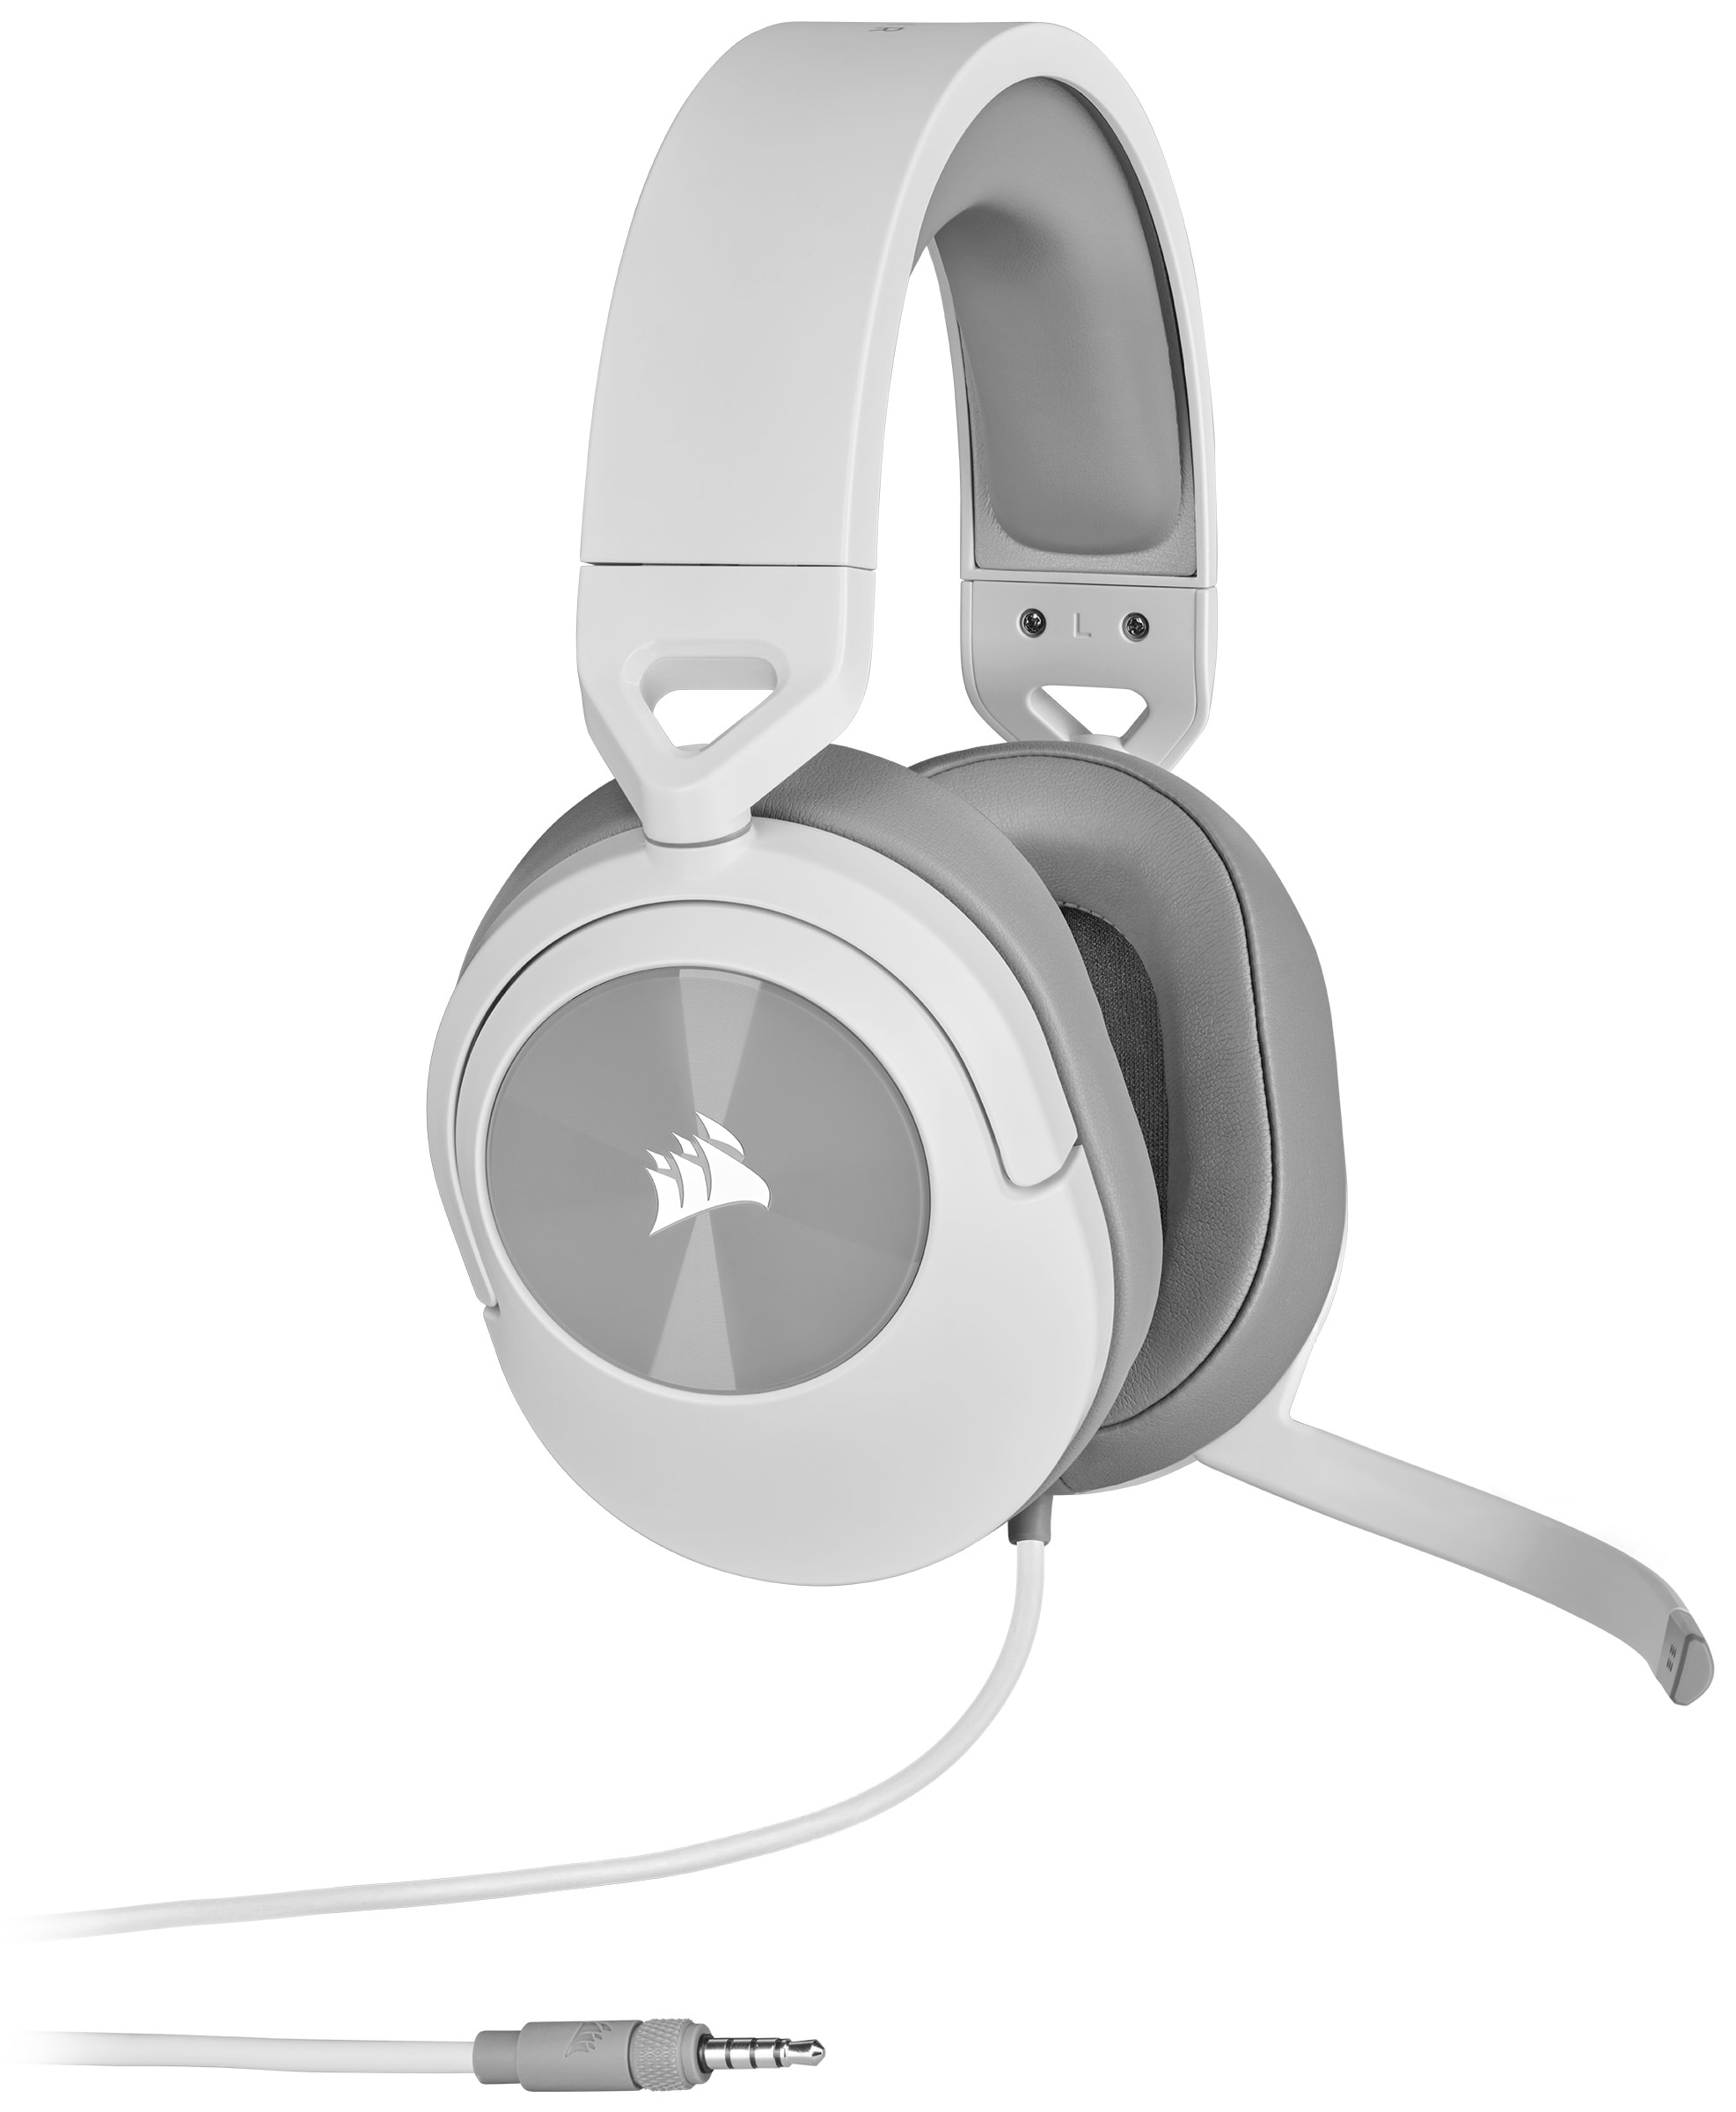 Corsair Gaming-Headset »HS55 Stereo UNIVERSAL | kaufen Carbon«